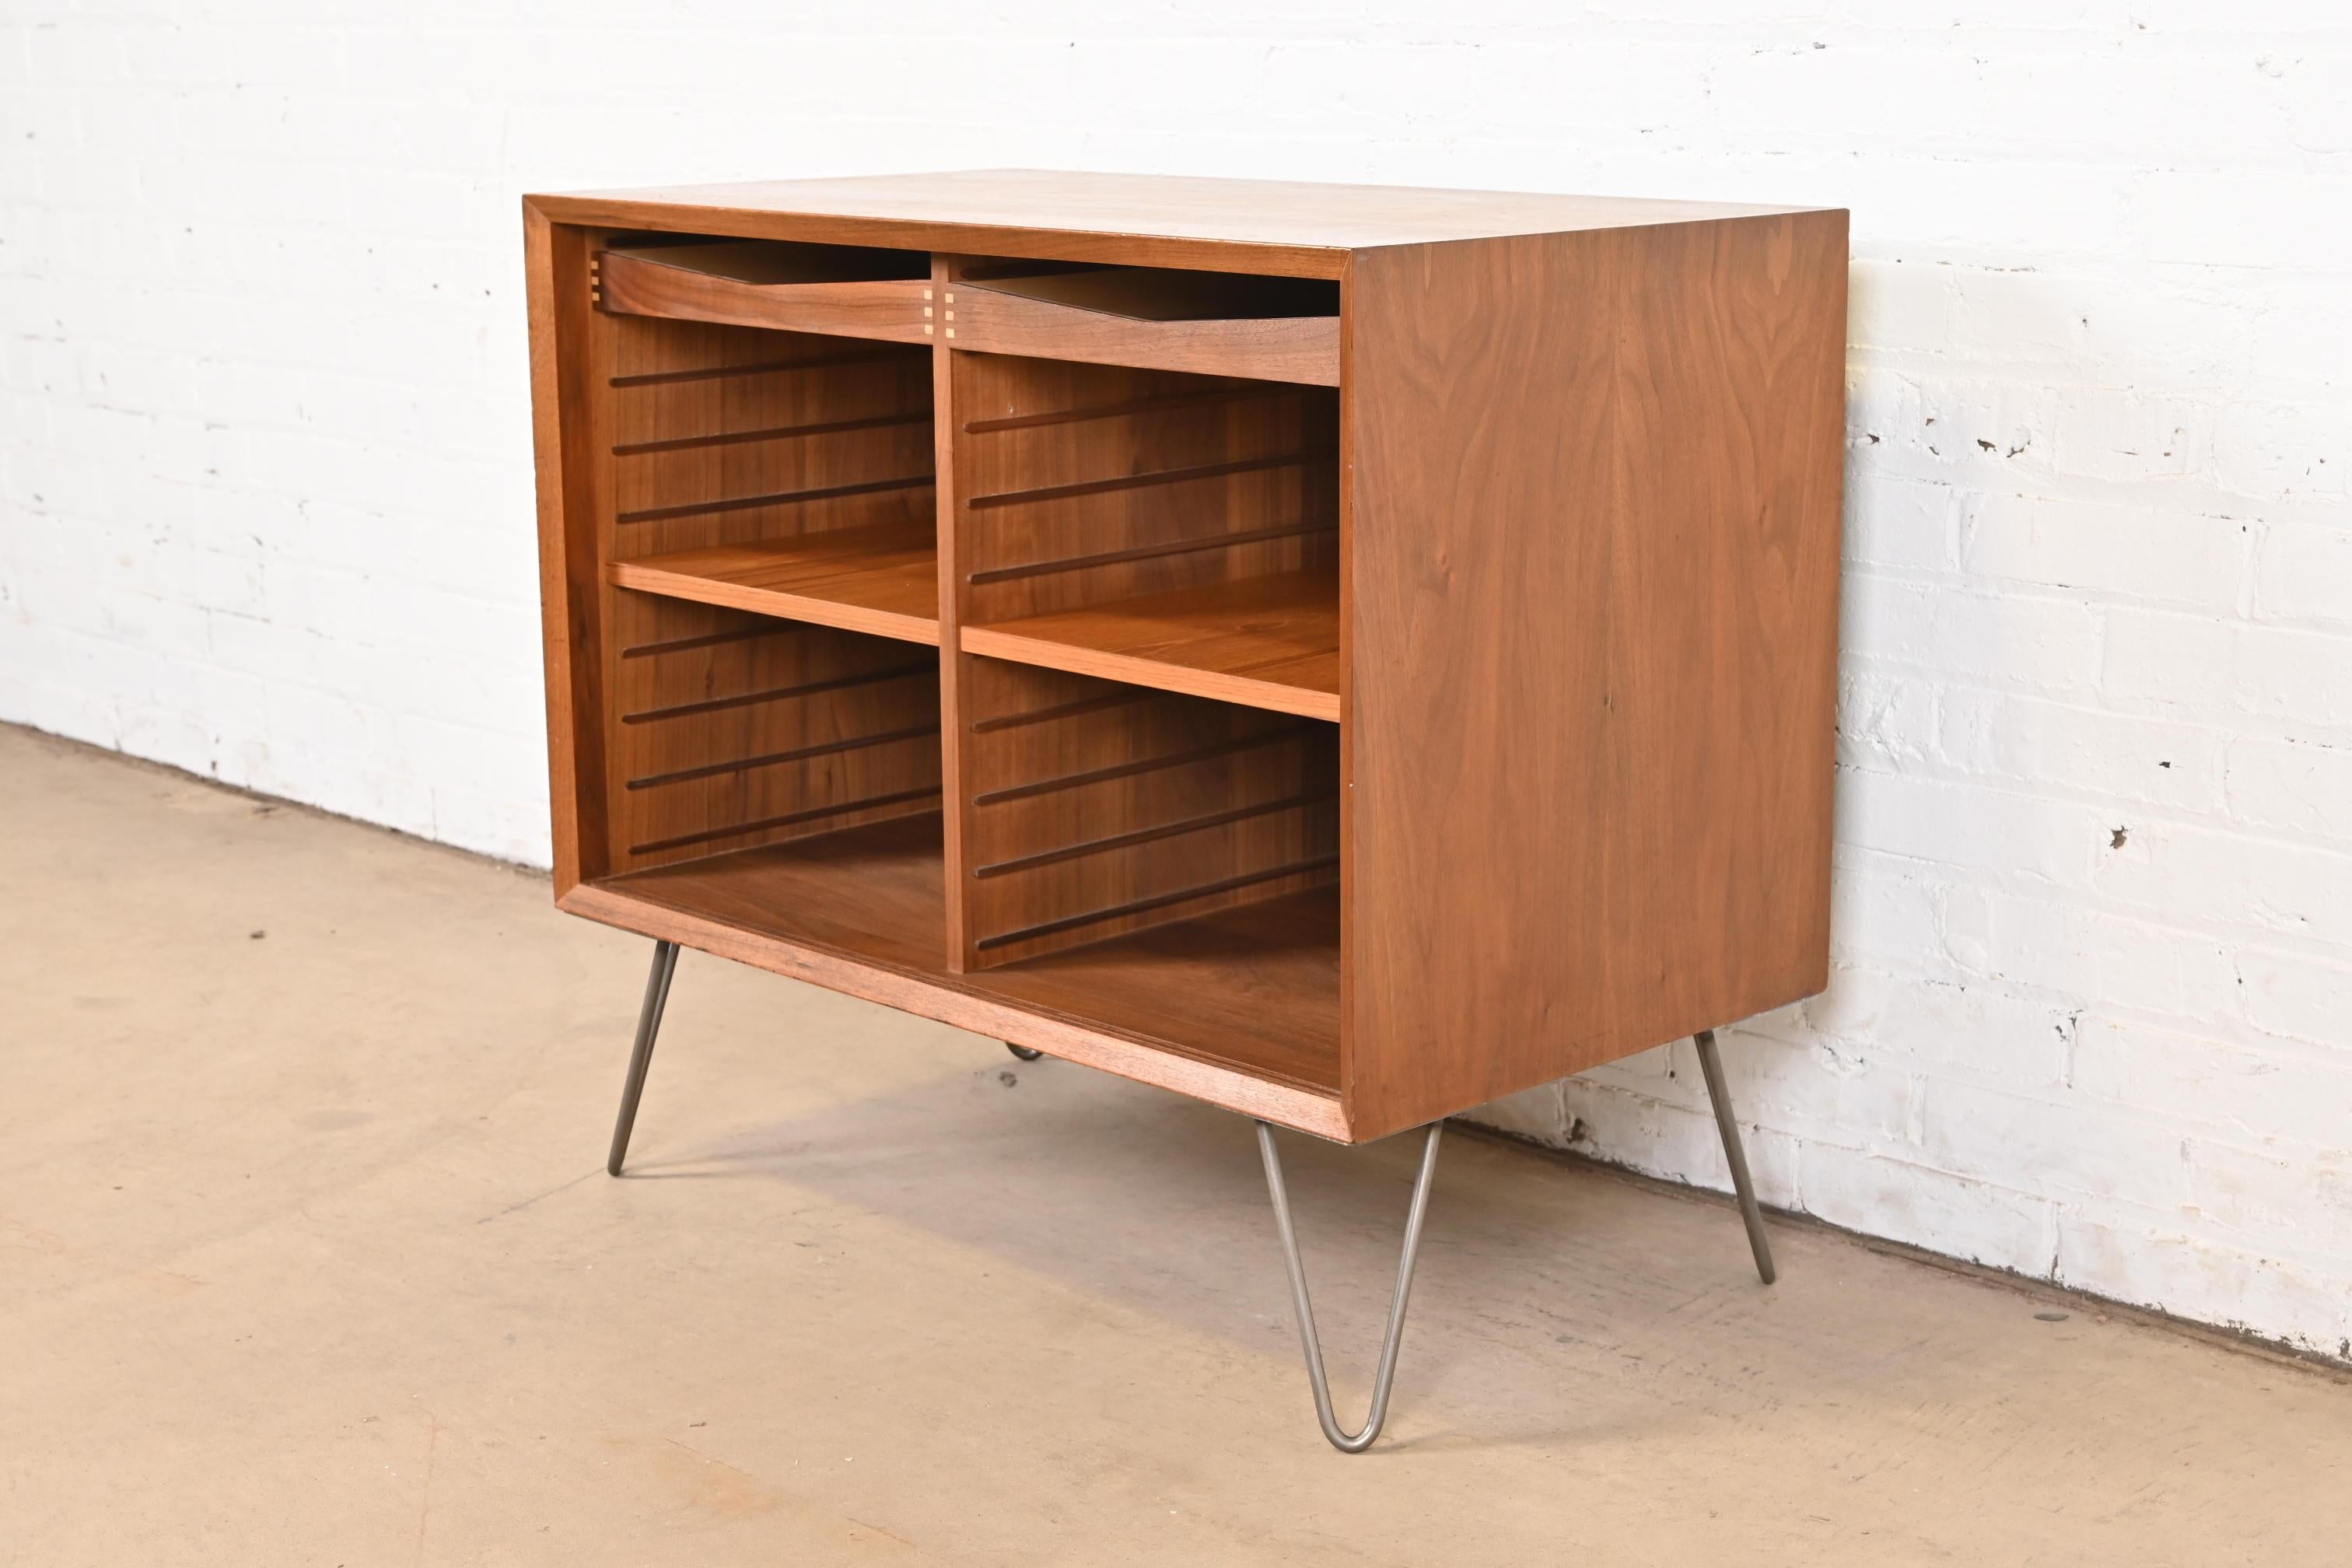 A sleek and stylish Mid-Century Danish Modern bookcase, record cabinet, or bar cabinet

In the manner of Arne Vodder

Denmark, Circa 1960s

Walnut, with steel hairpin legs. Shelves and drawers are adjustable and removable.

Measures: 31.5